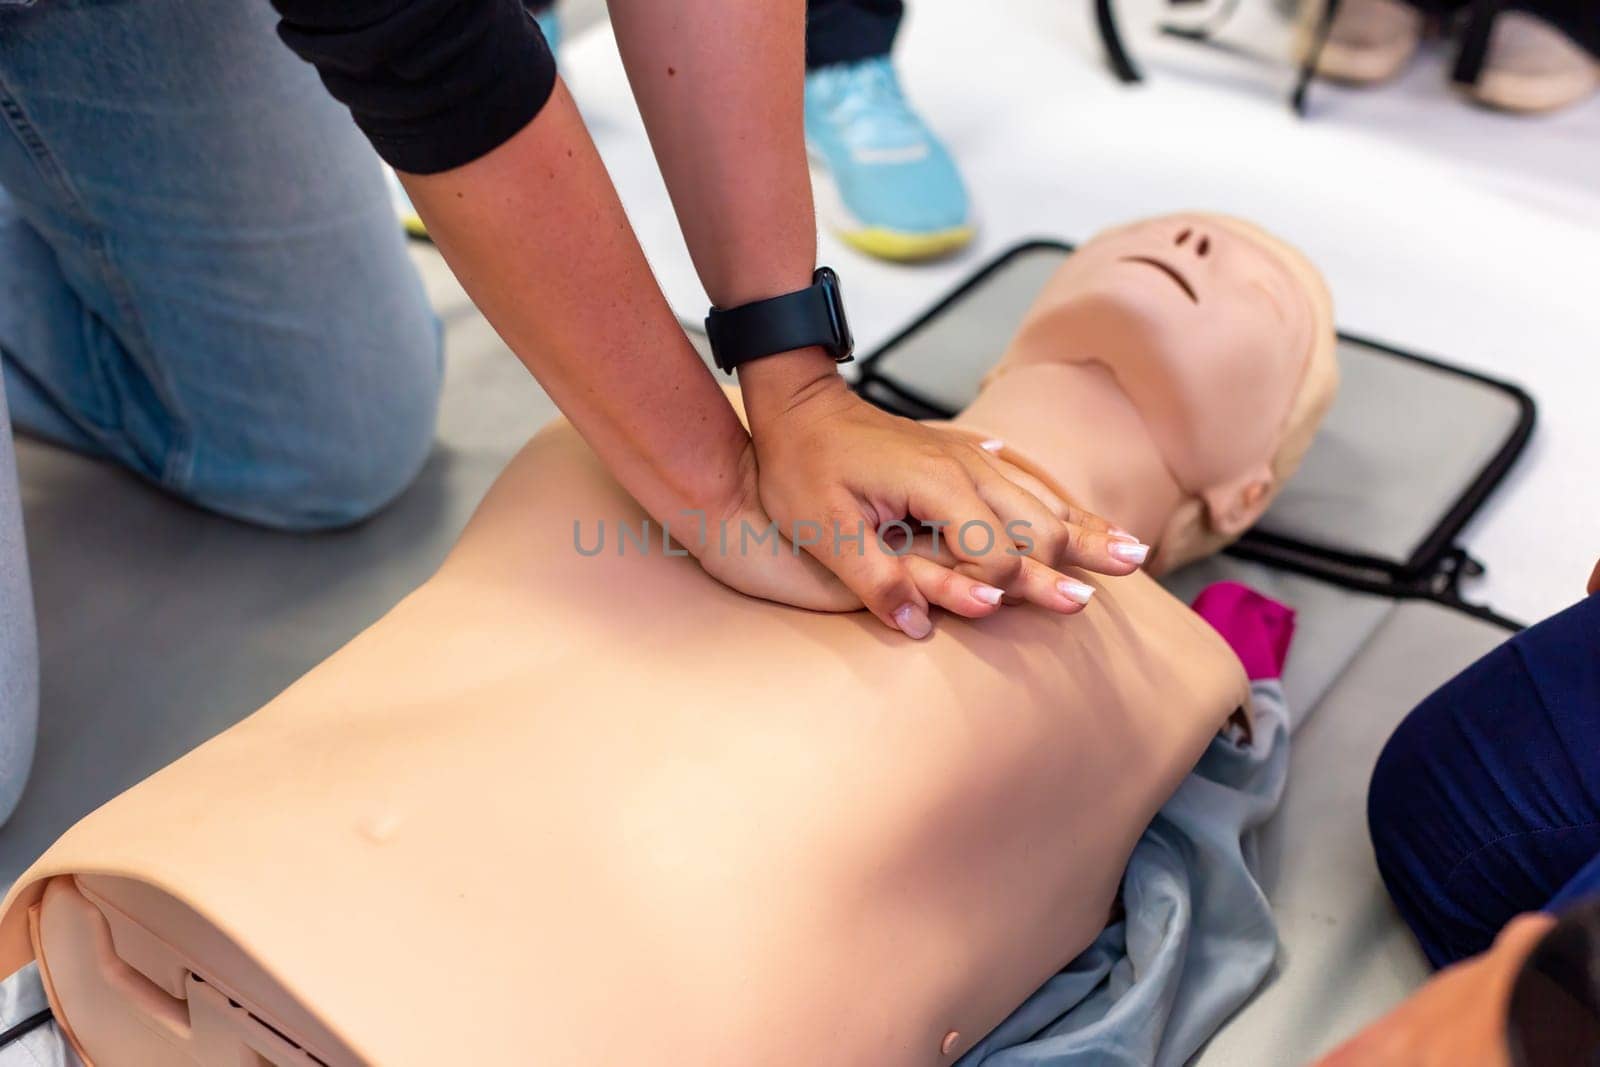 Close-up of hands performing CPR on a training manikin during a first aid class. by Zakharova